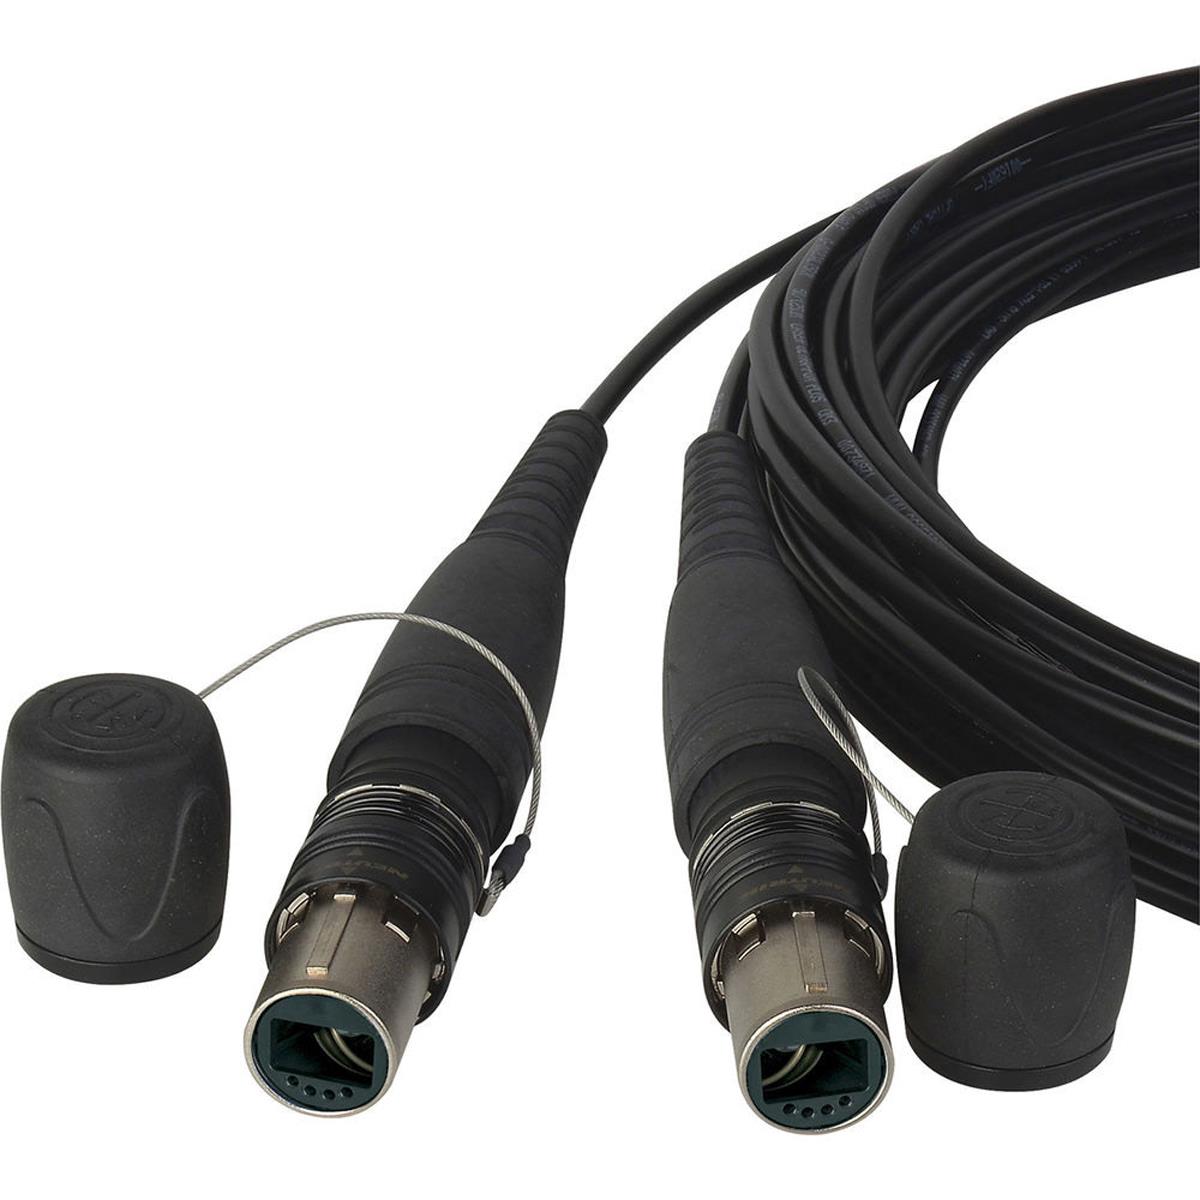 Image of Camplex 3' opticalCON DUO to DUO Multimode Fiber Optic Tactical Snake Cable